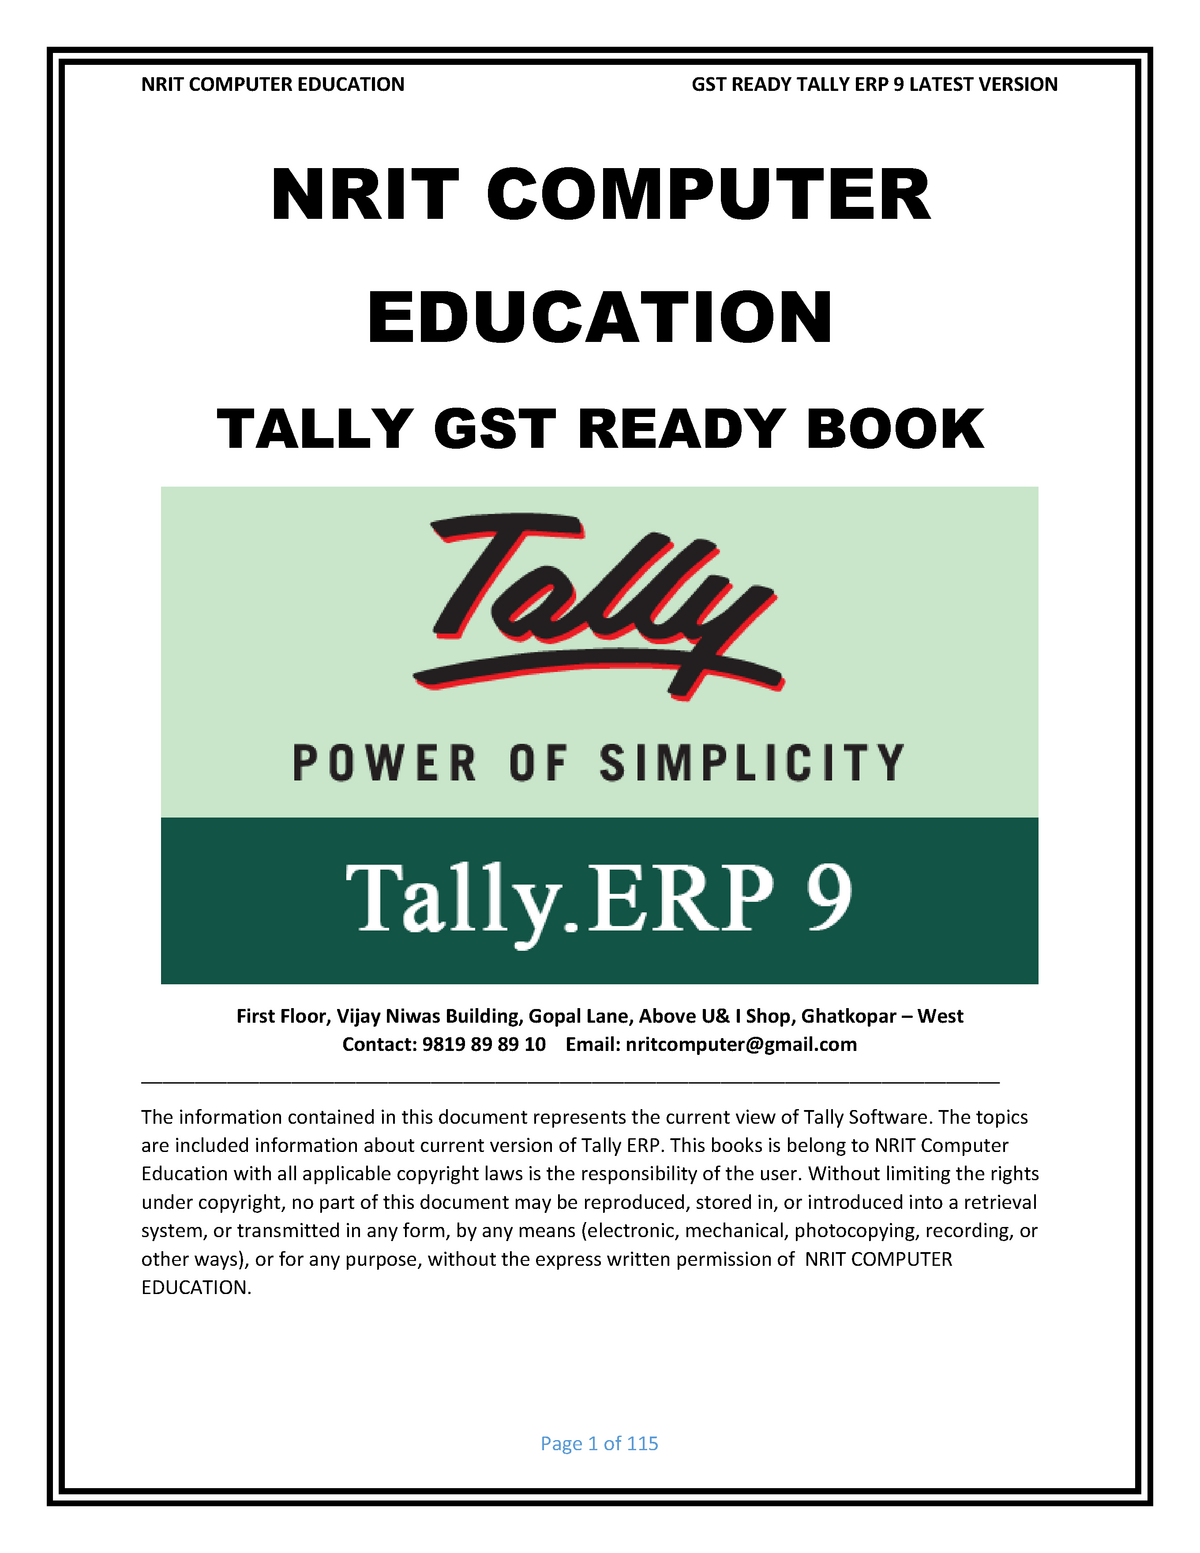 tally erp 9 assignment pdf download